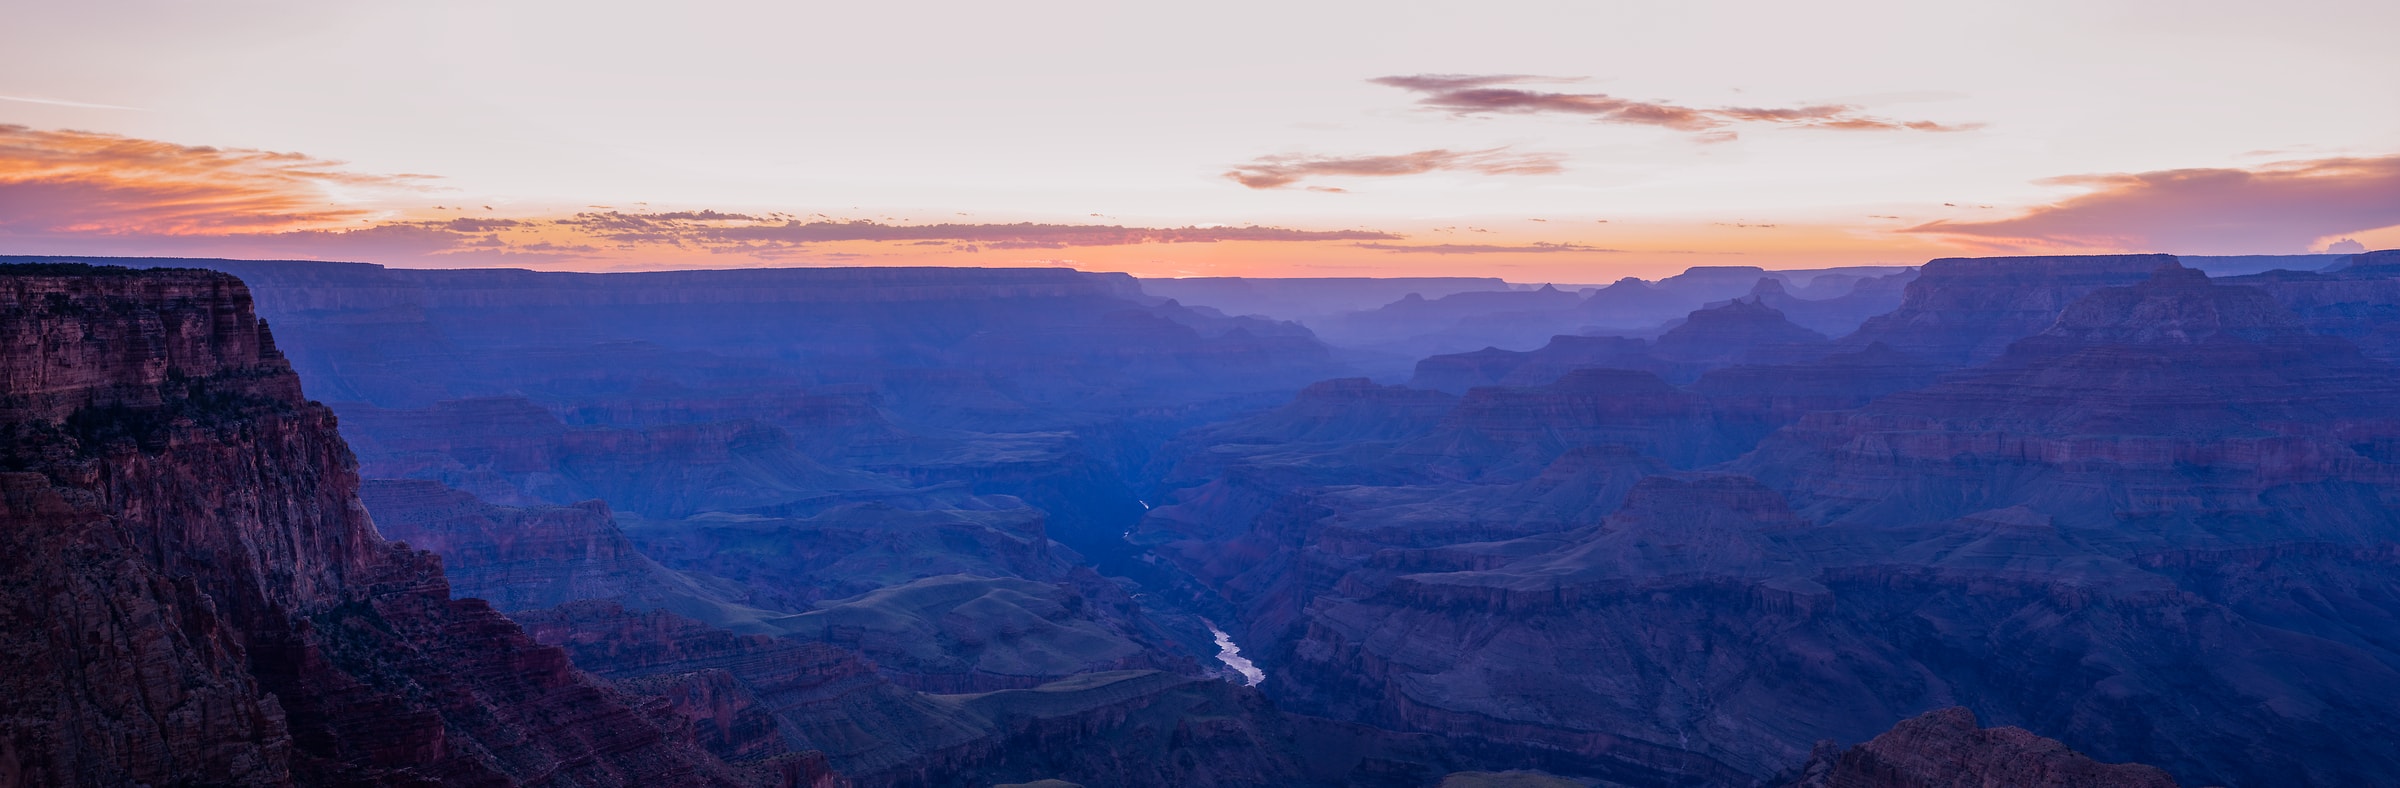 528 megapixels! A very high resolution, large-format, artistic photo of the Grand Canyon at sunset; landscape photograph created by Greg Probst in Grand Canyon National Park, Arizona.